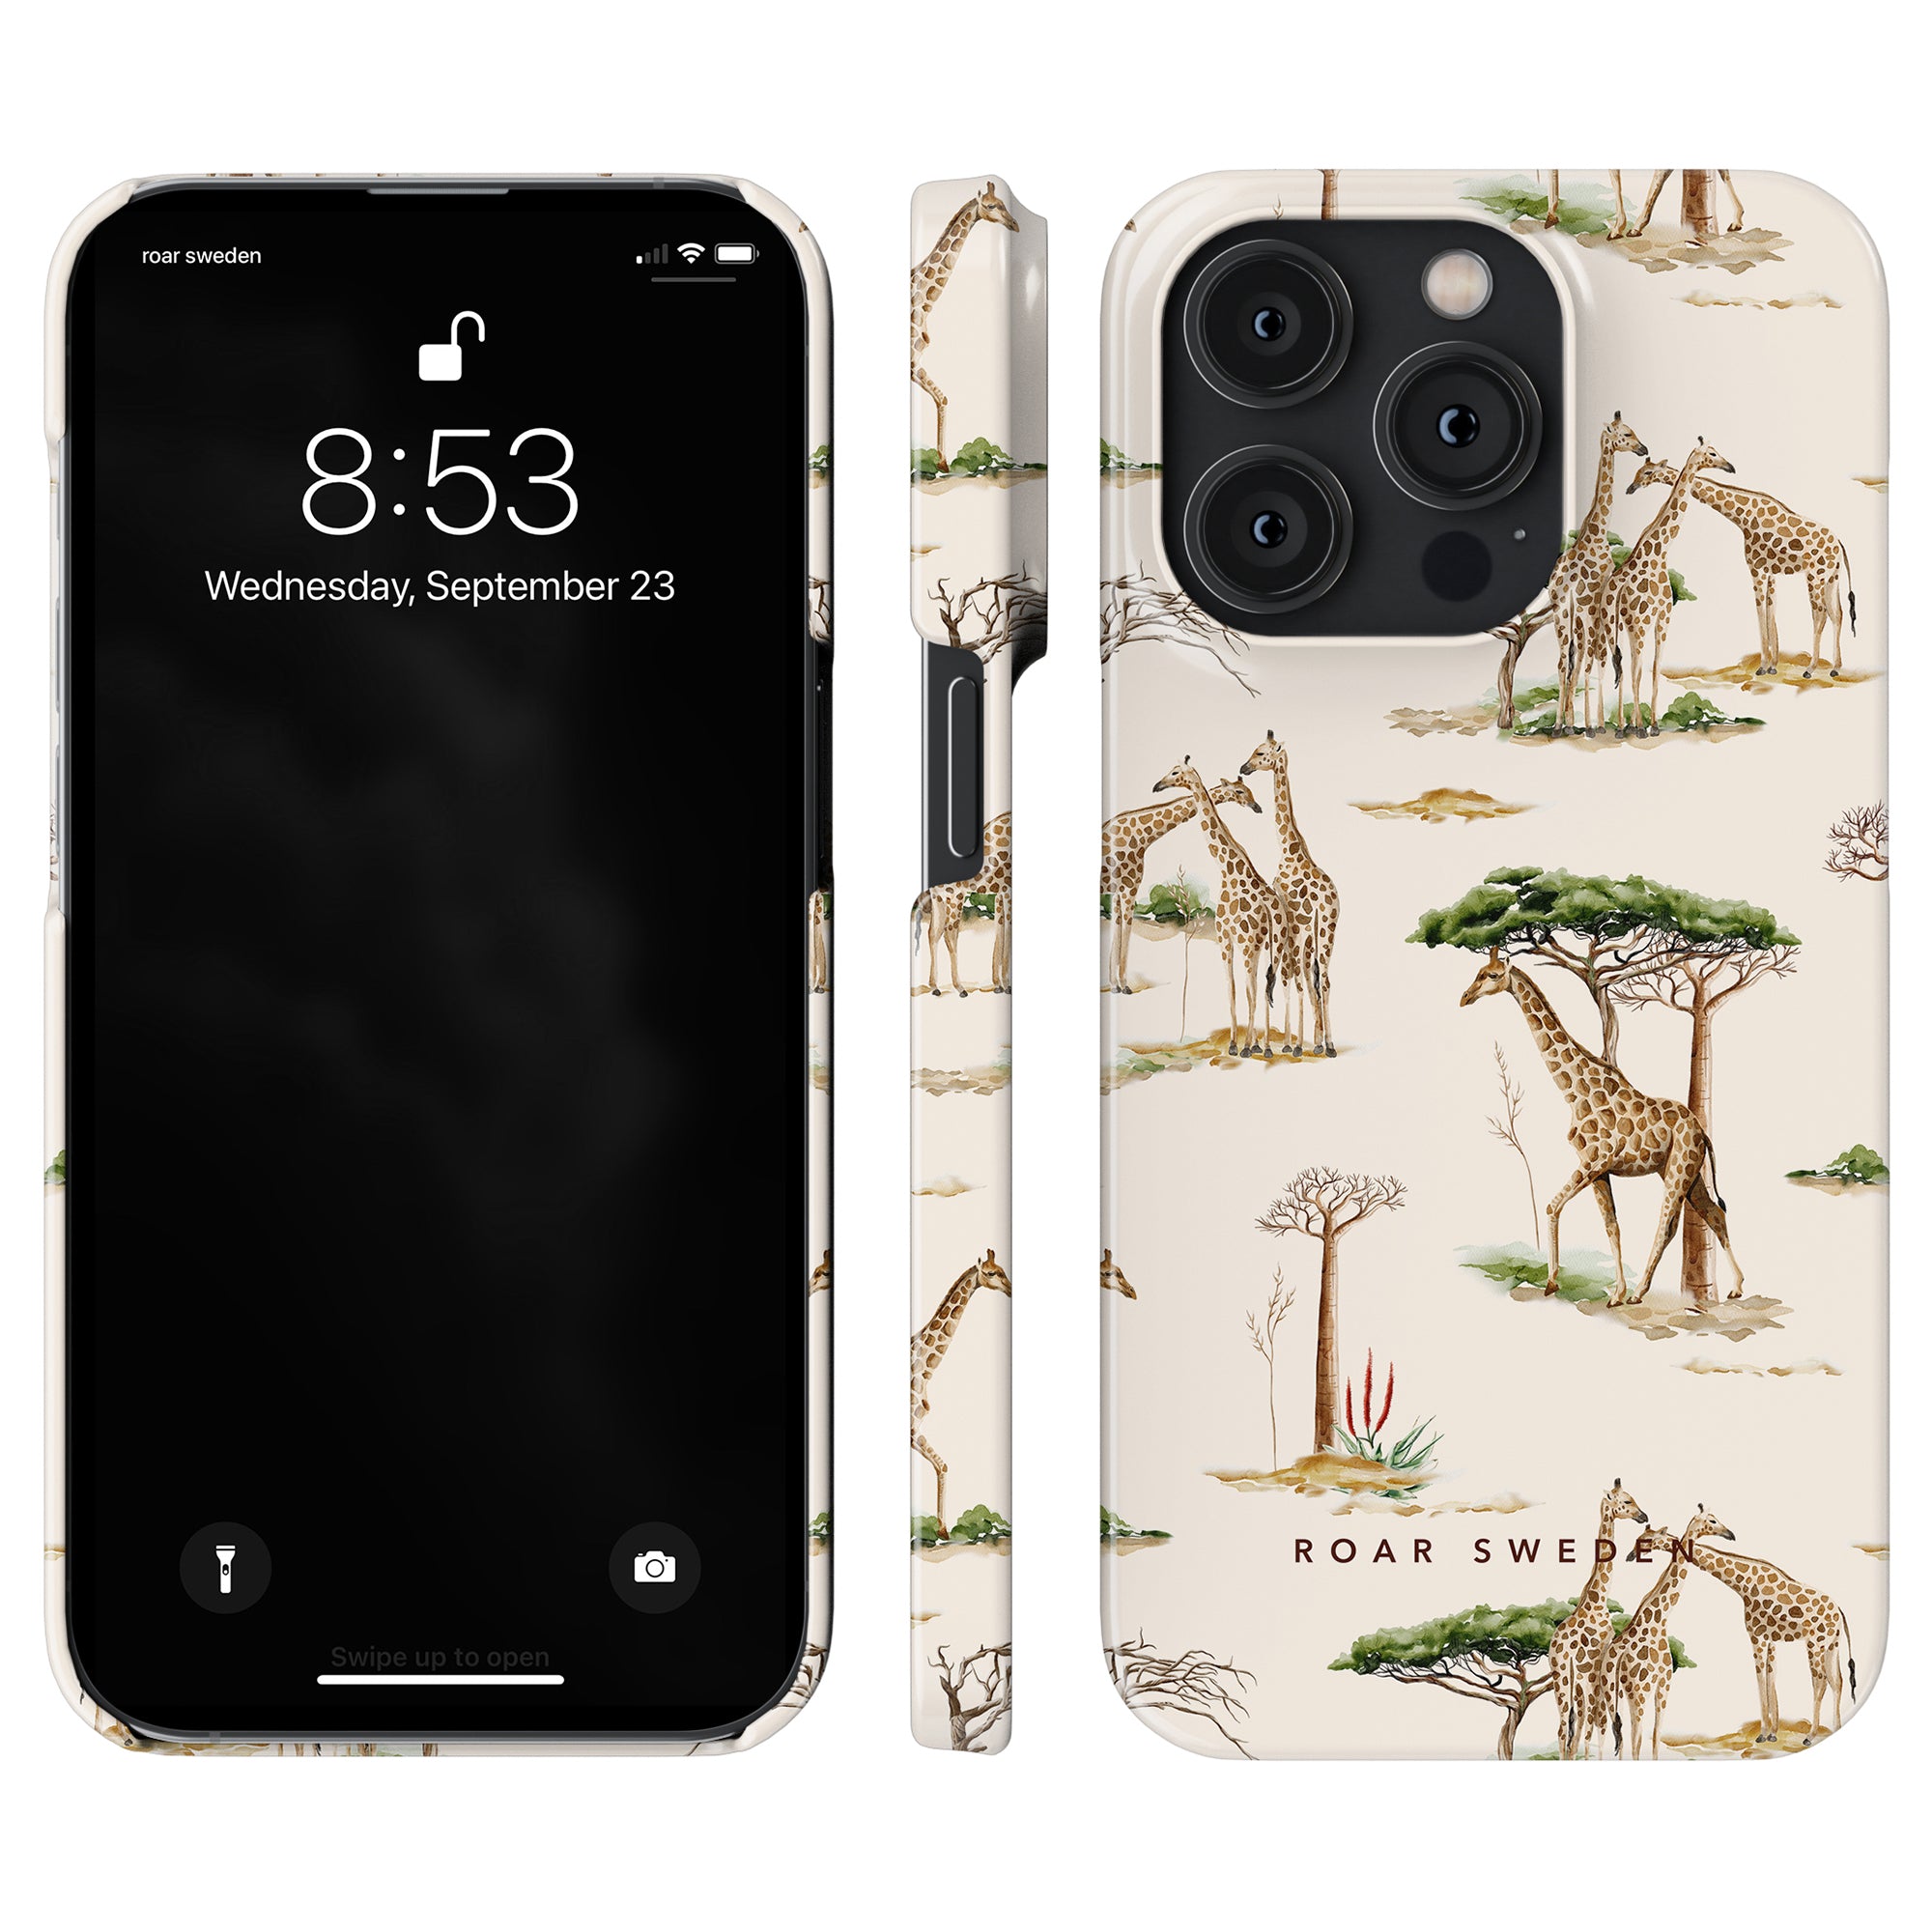 IPhone with time displayed at 8:53, date Wednesday, September 23, in a phone case featuring illustrations of giraffes and trees. The "Giraffa - Slim case" from the Safari Collection offers both style and skydd mot repor och stötar.